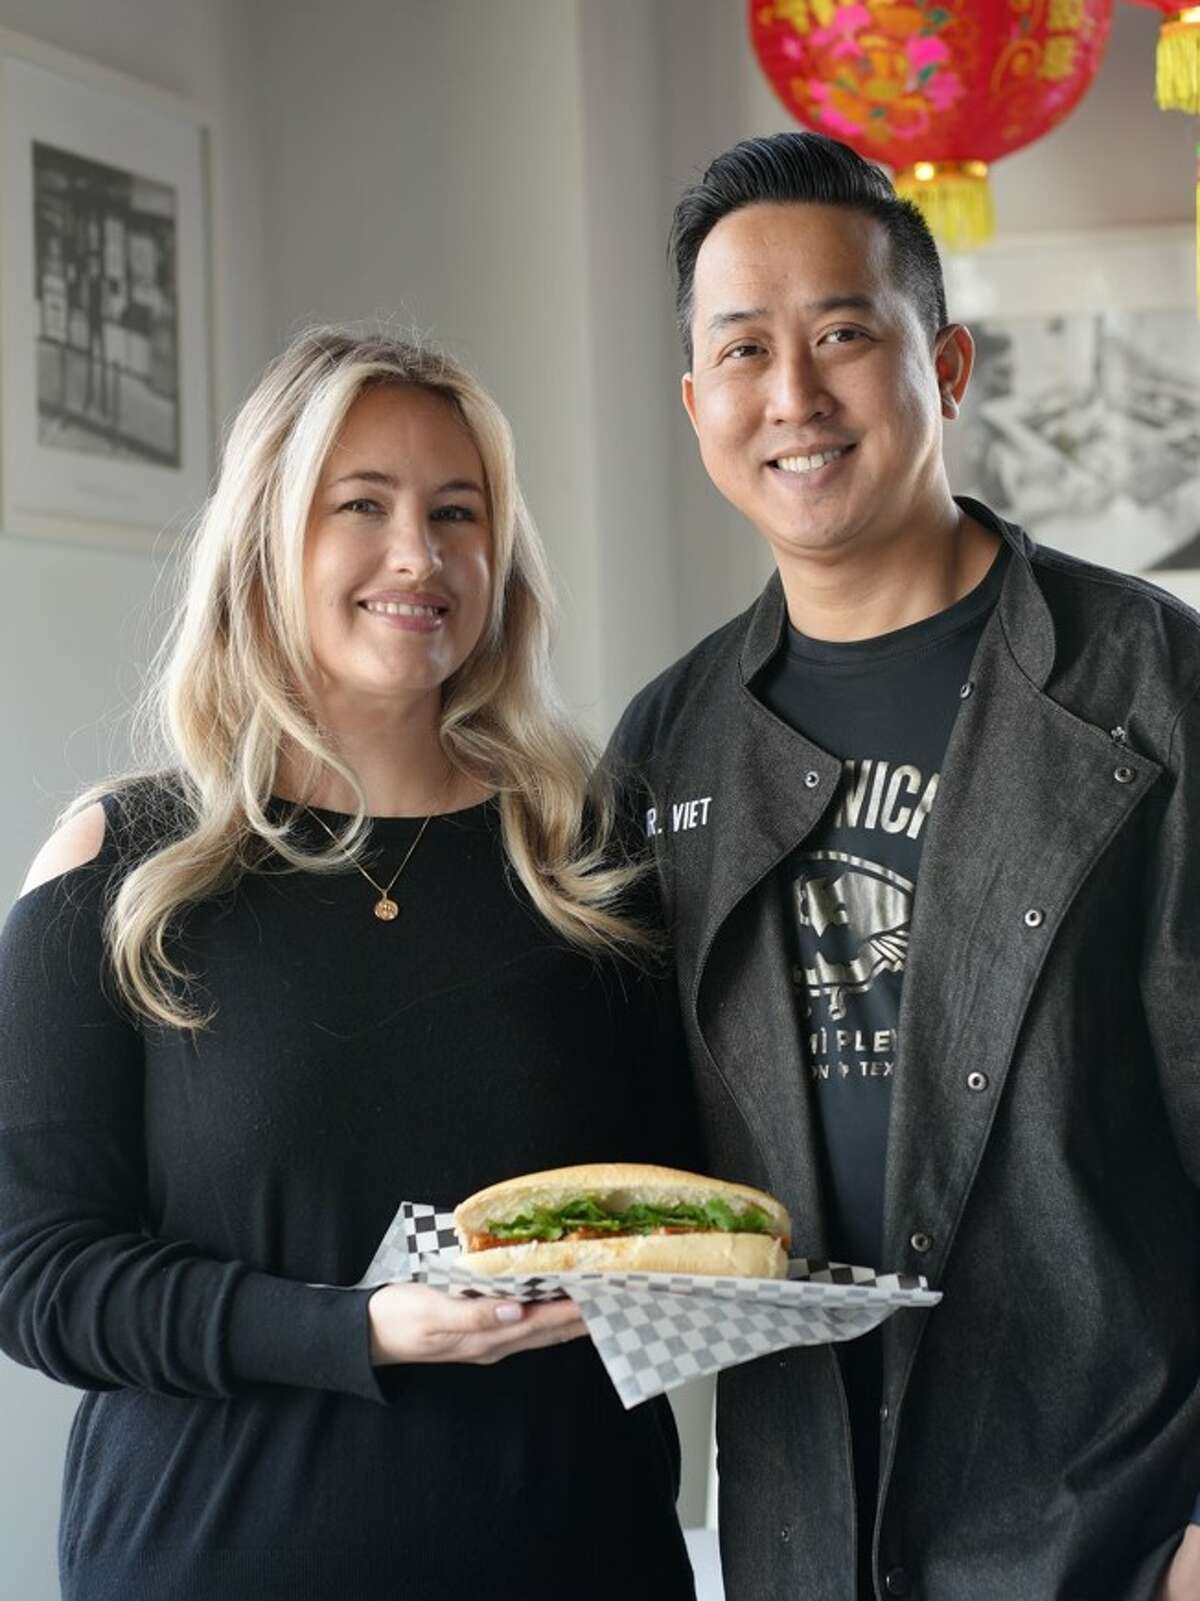 Vietwich owners Viet and Michelle Tran have seen their Stafford bánh mì shop featured in Yelp’s Top 100 U.S. restaurants. Viet Tran opened the location April 2019 after nine years of success in the food industry.